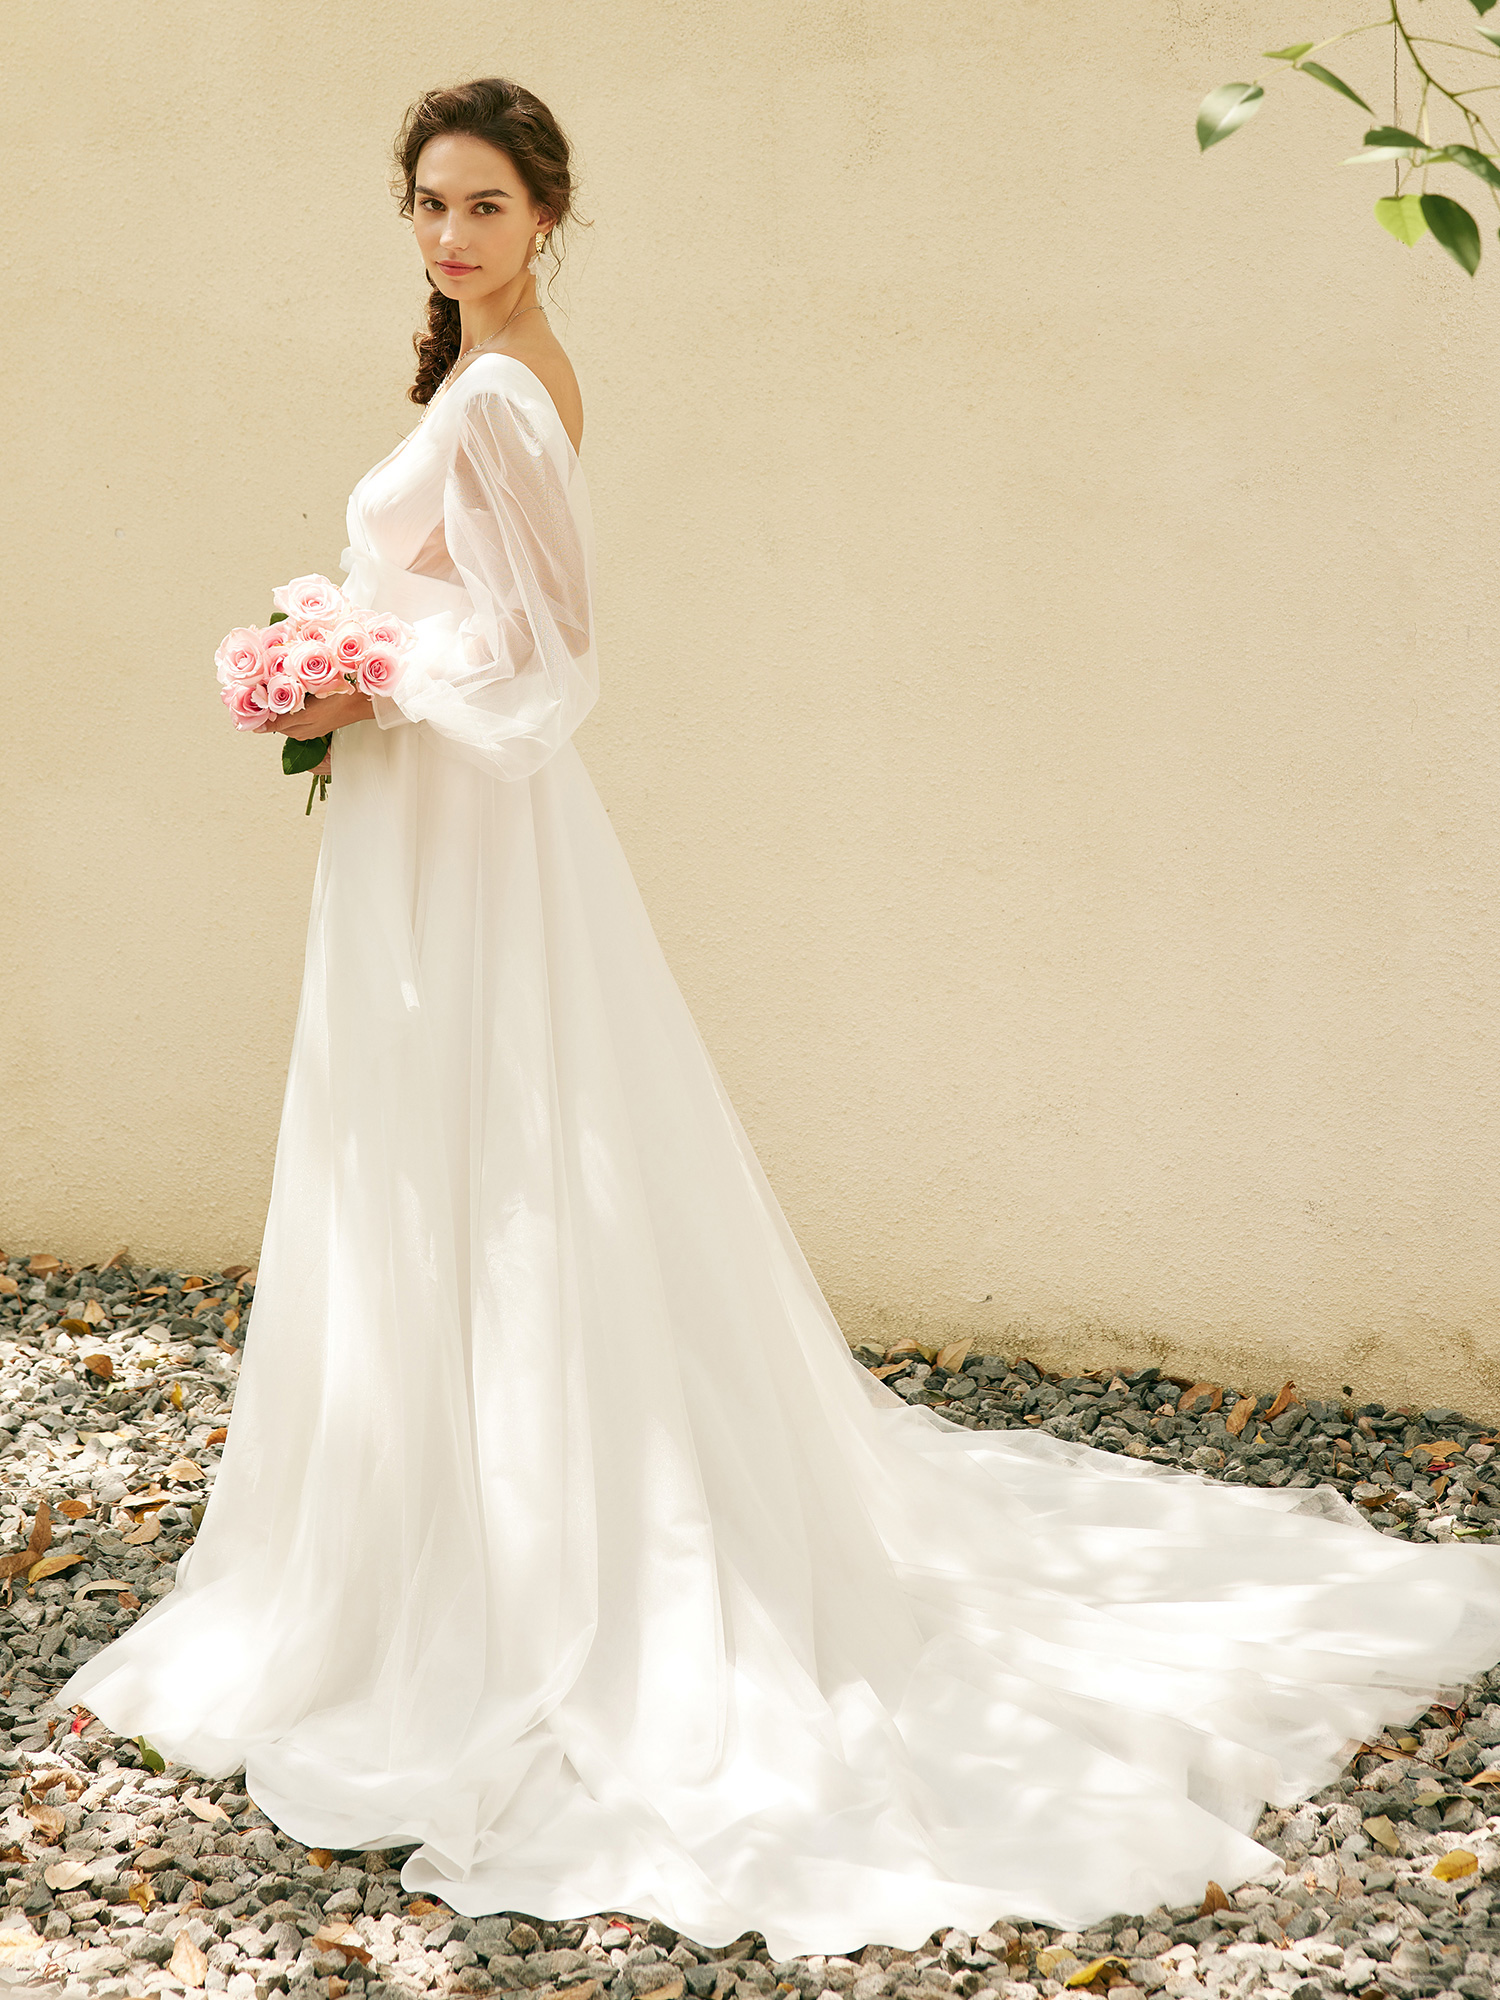 Top 10 wedding dress silhouettes for any bride